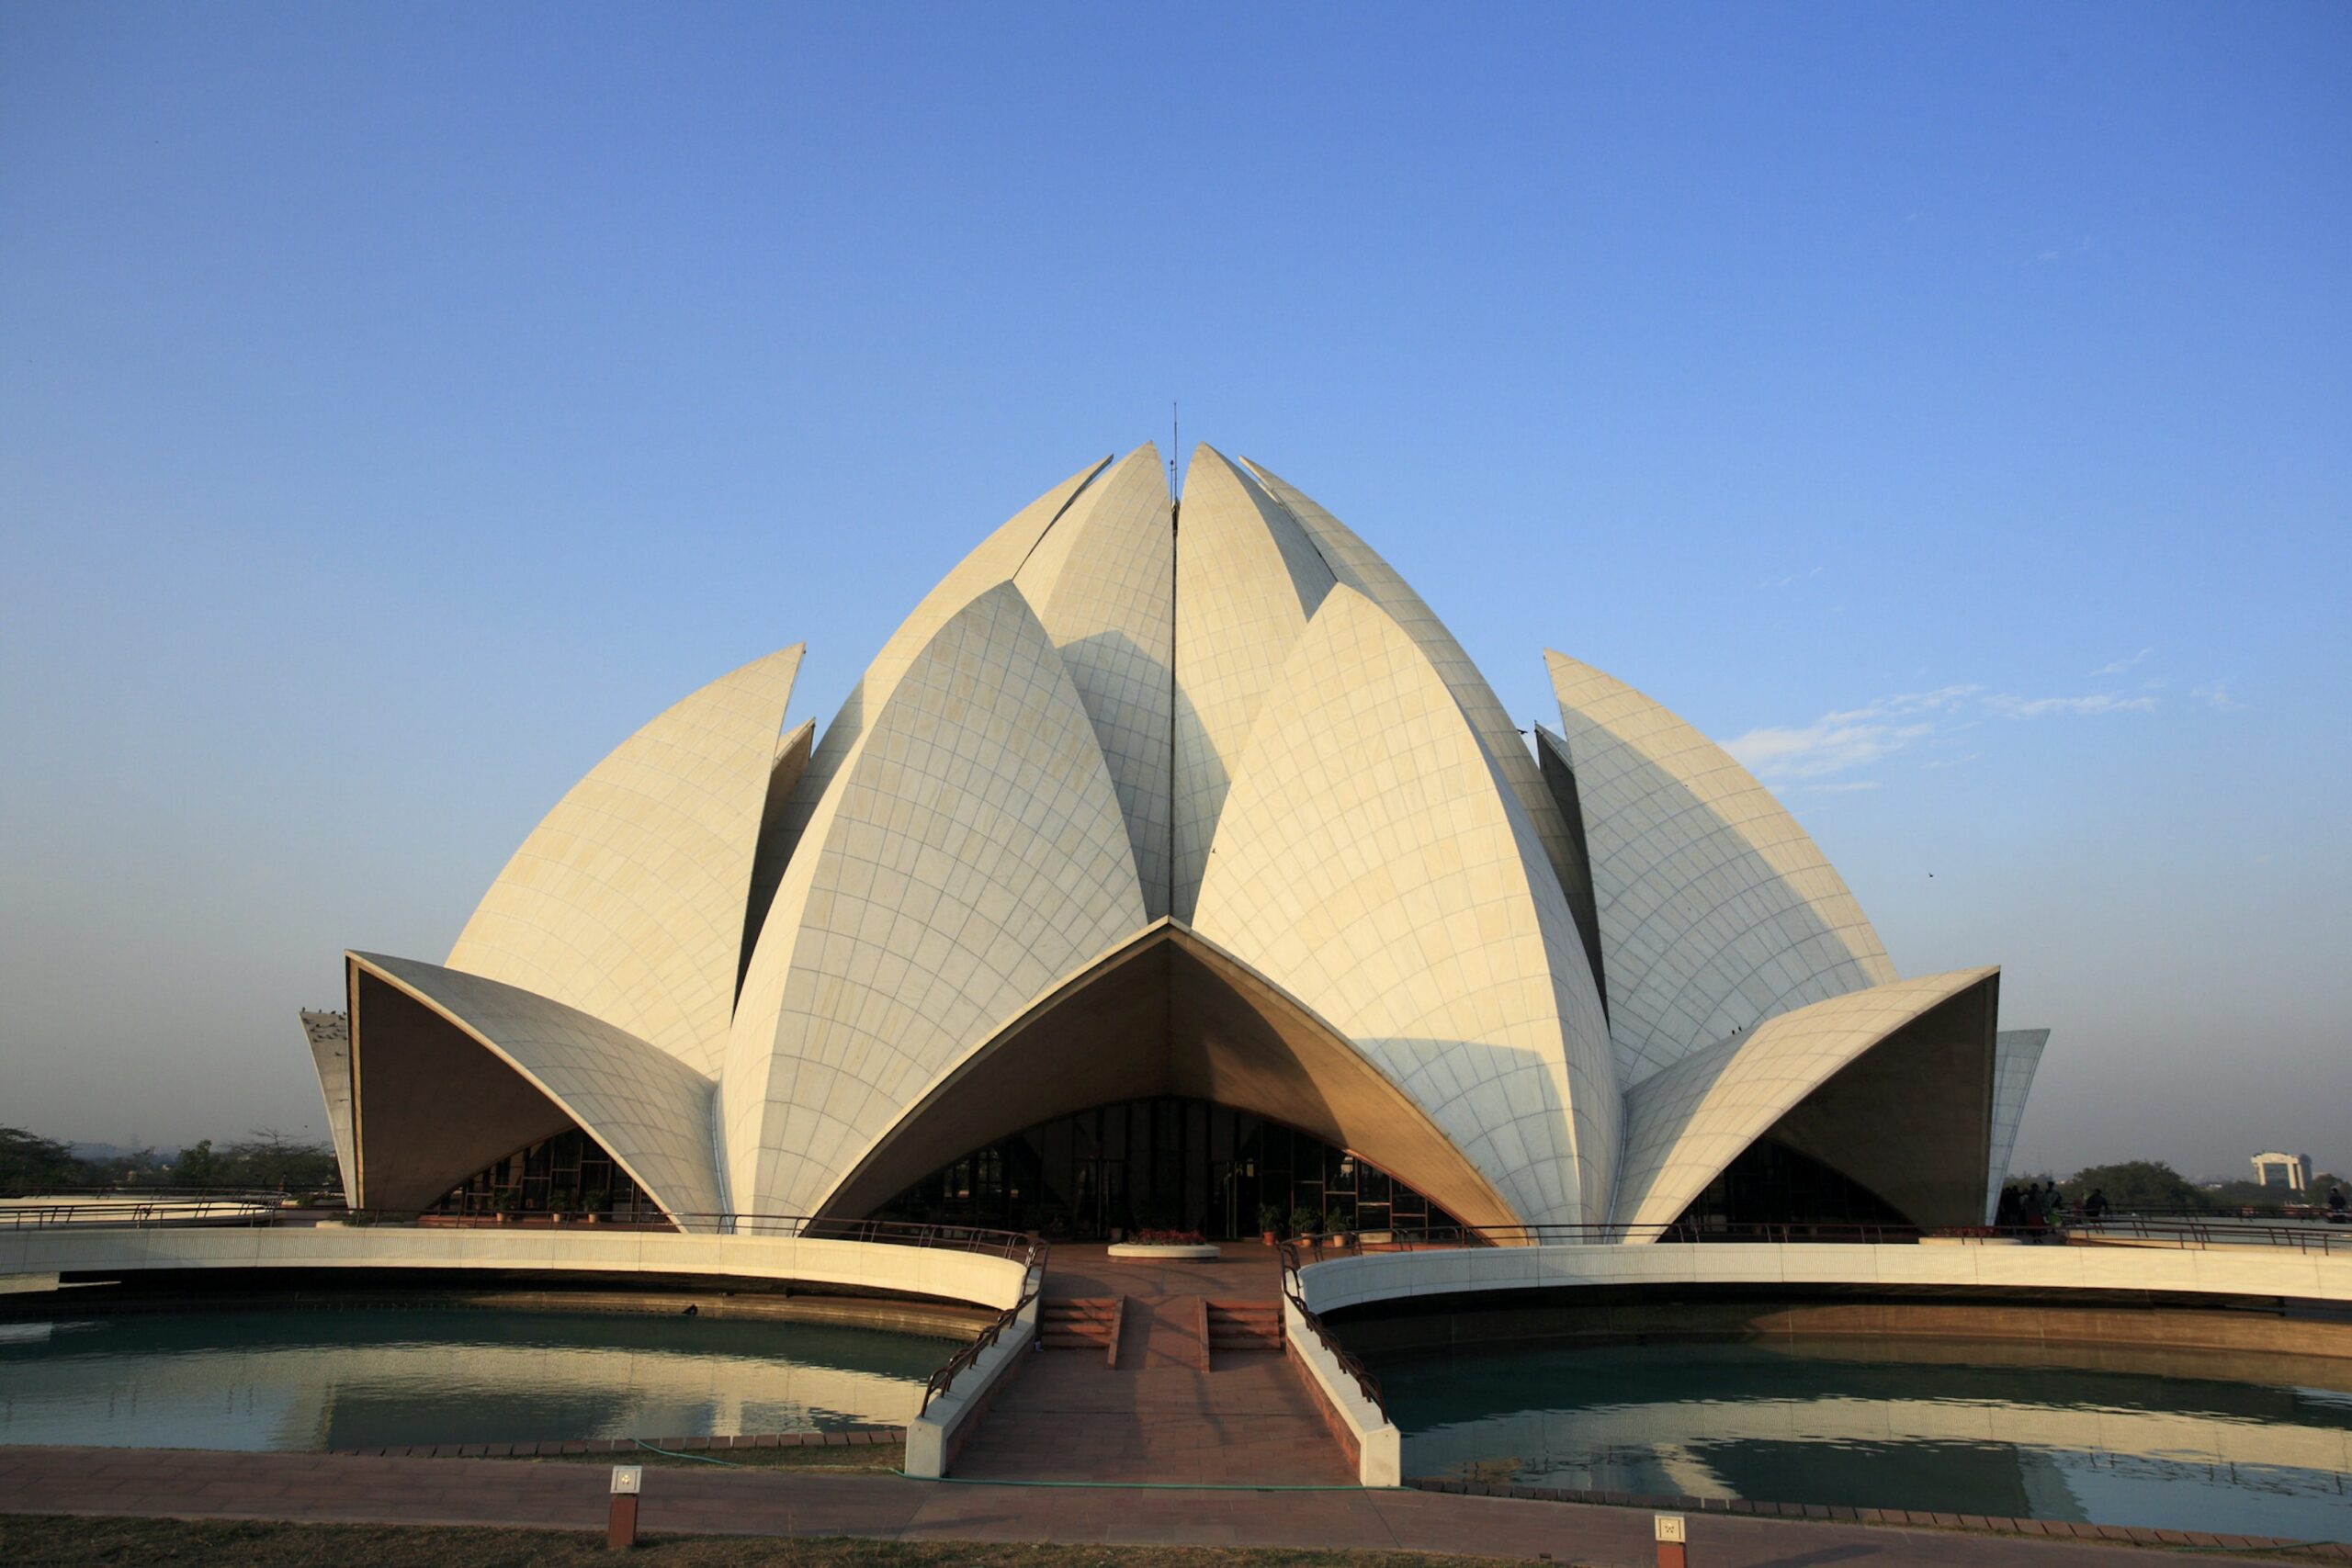 Where is Lotus Temple